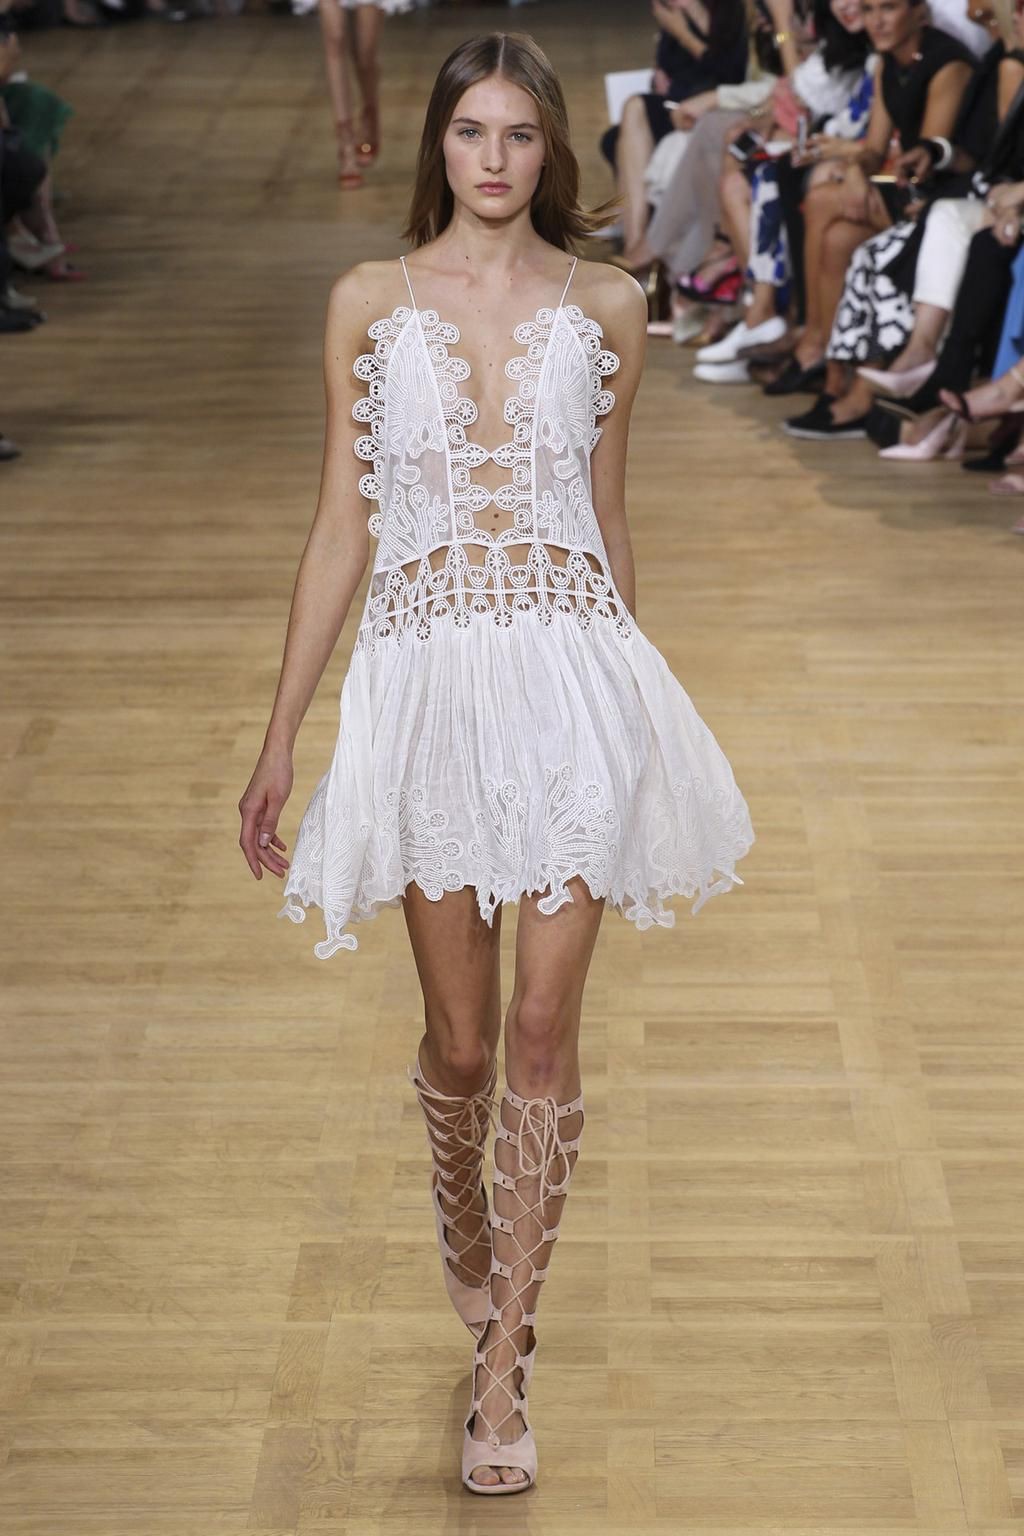 Most awaited style for chloe spring summer 2015, Clare Waight Keller: Fashion show,  Fashion week,  Gladiator Sandals Dresses  